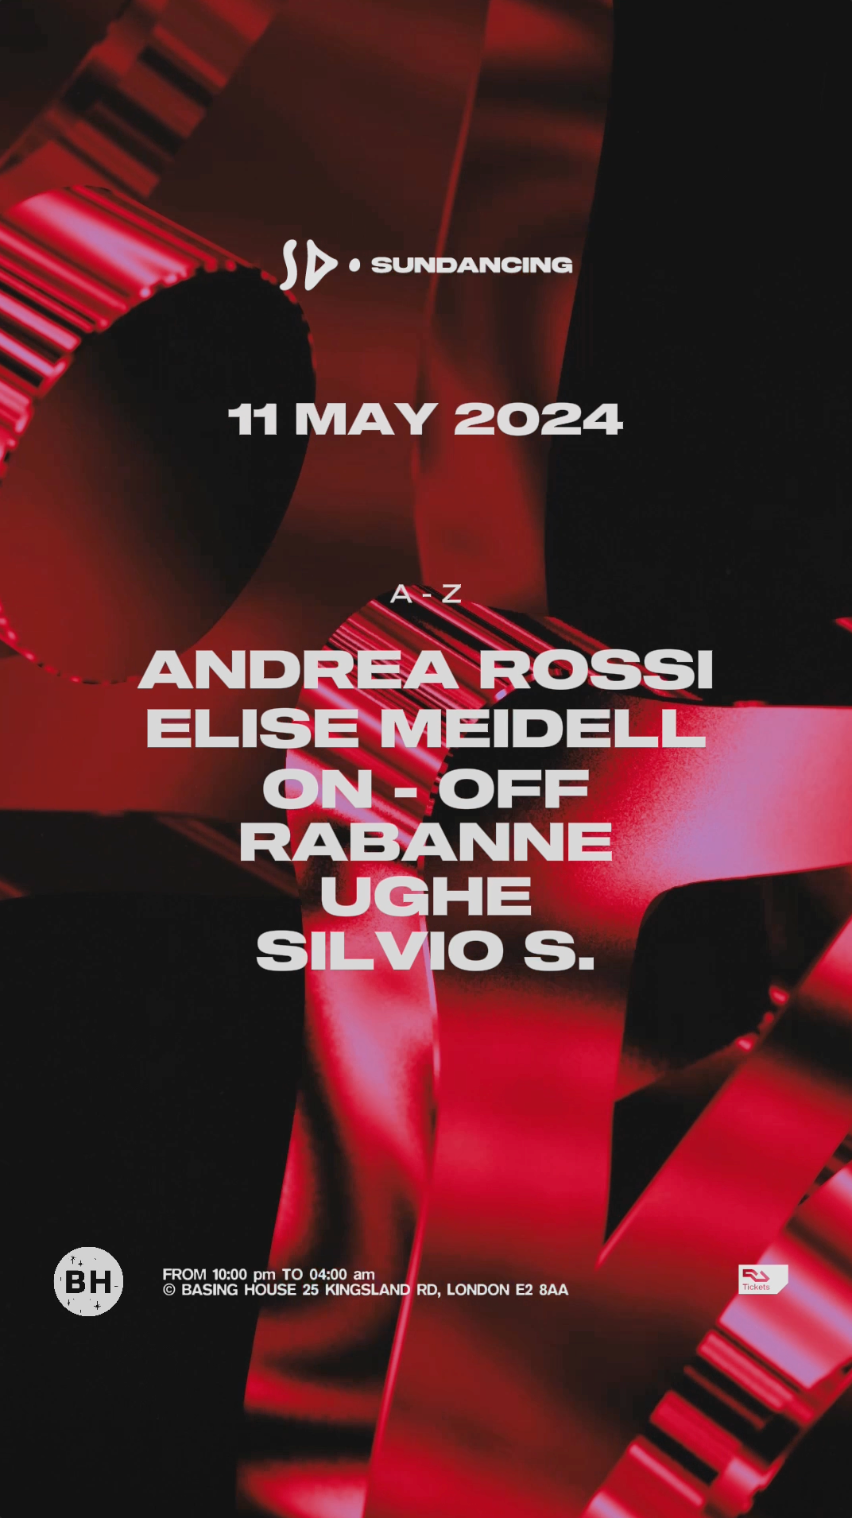 Sundancing with Andrea Rossi - Elise Meidell - On off - Rabanne - Ughe - Silvio S - フライヤー表